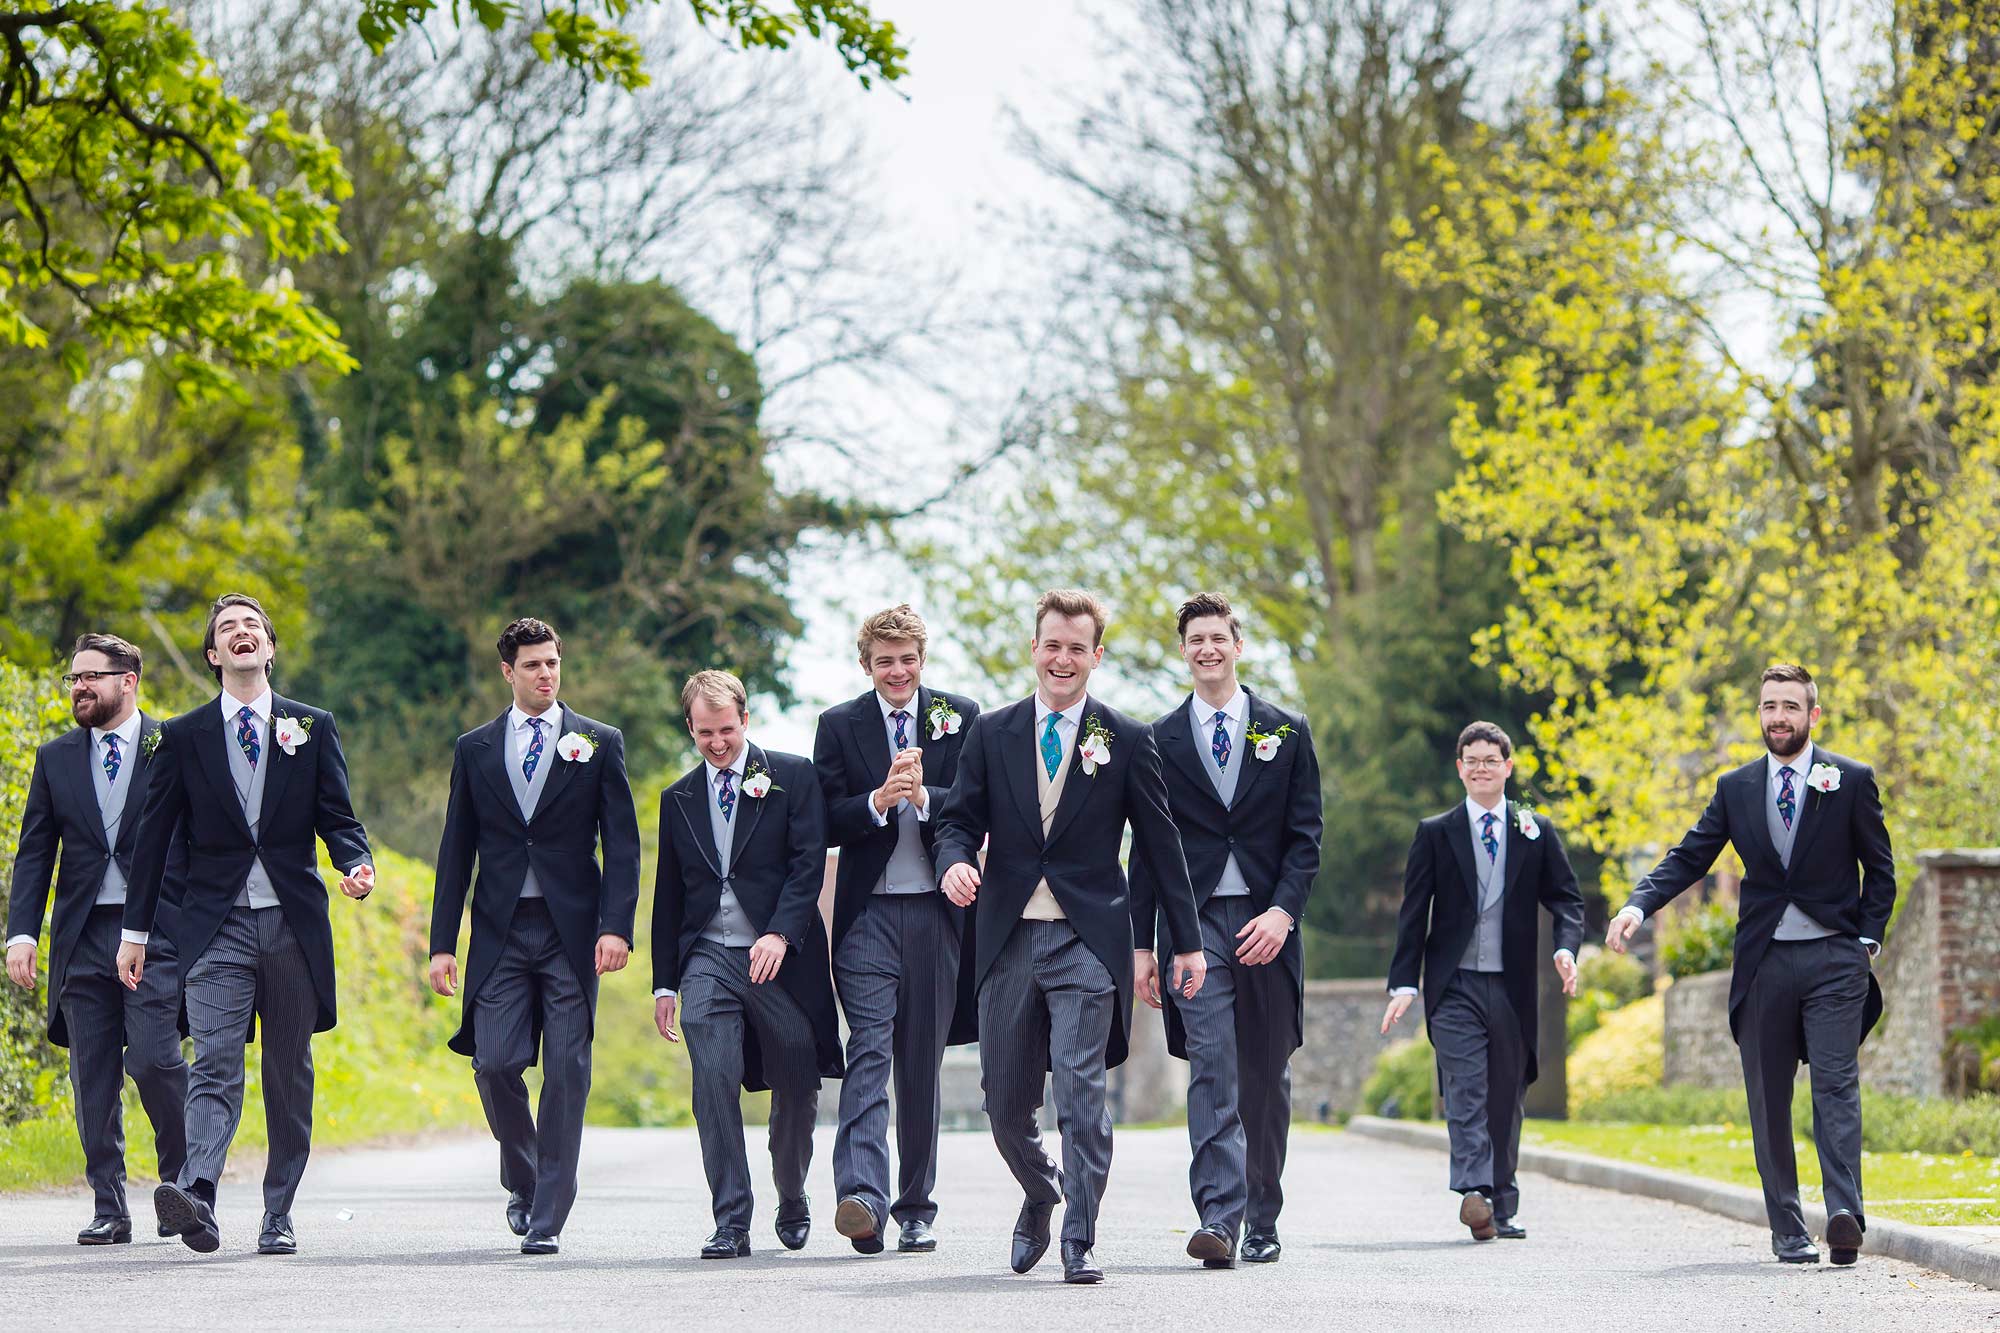 The guys take a walk before the Goodwood House Wedding